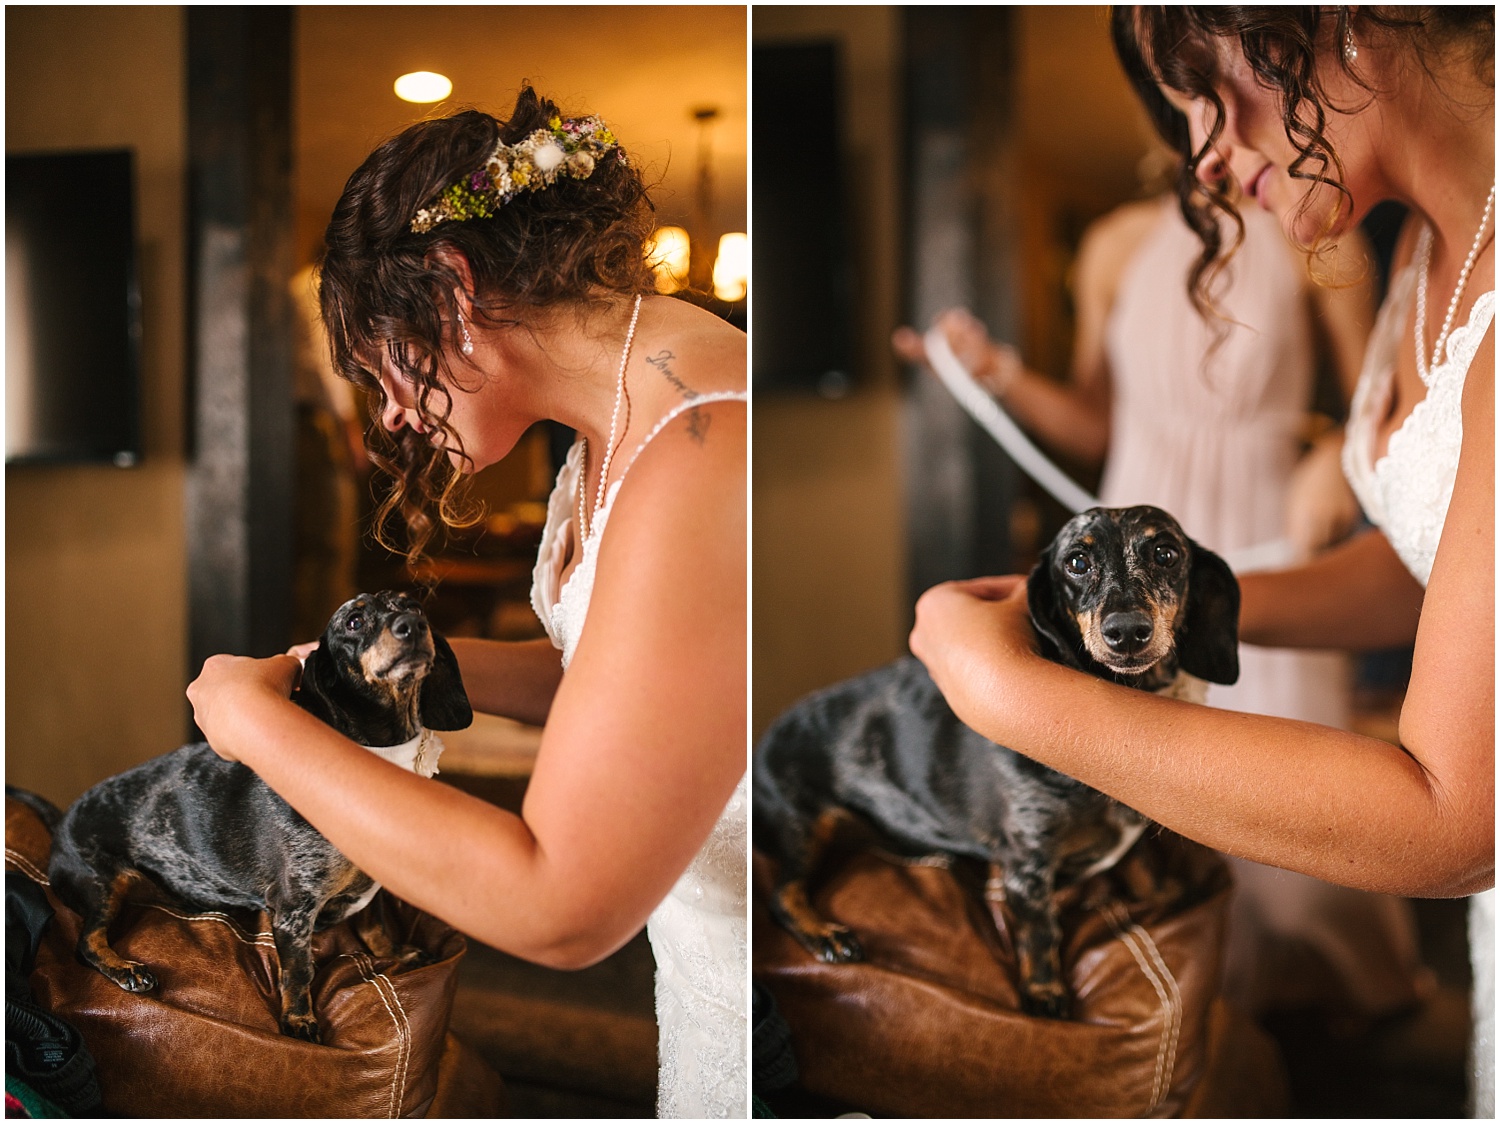 Bride dressing up her dog for wedding ceremony at Guyton Ranch